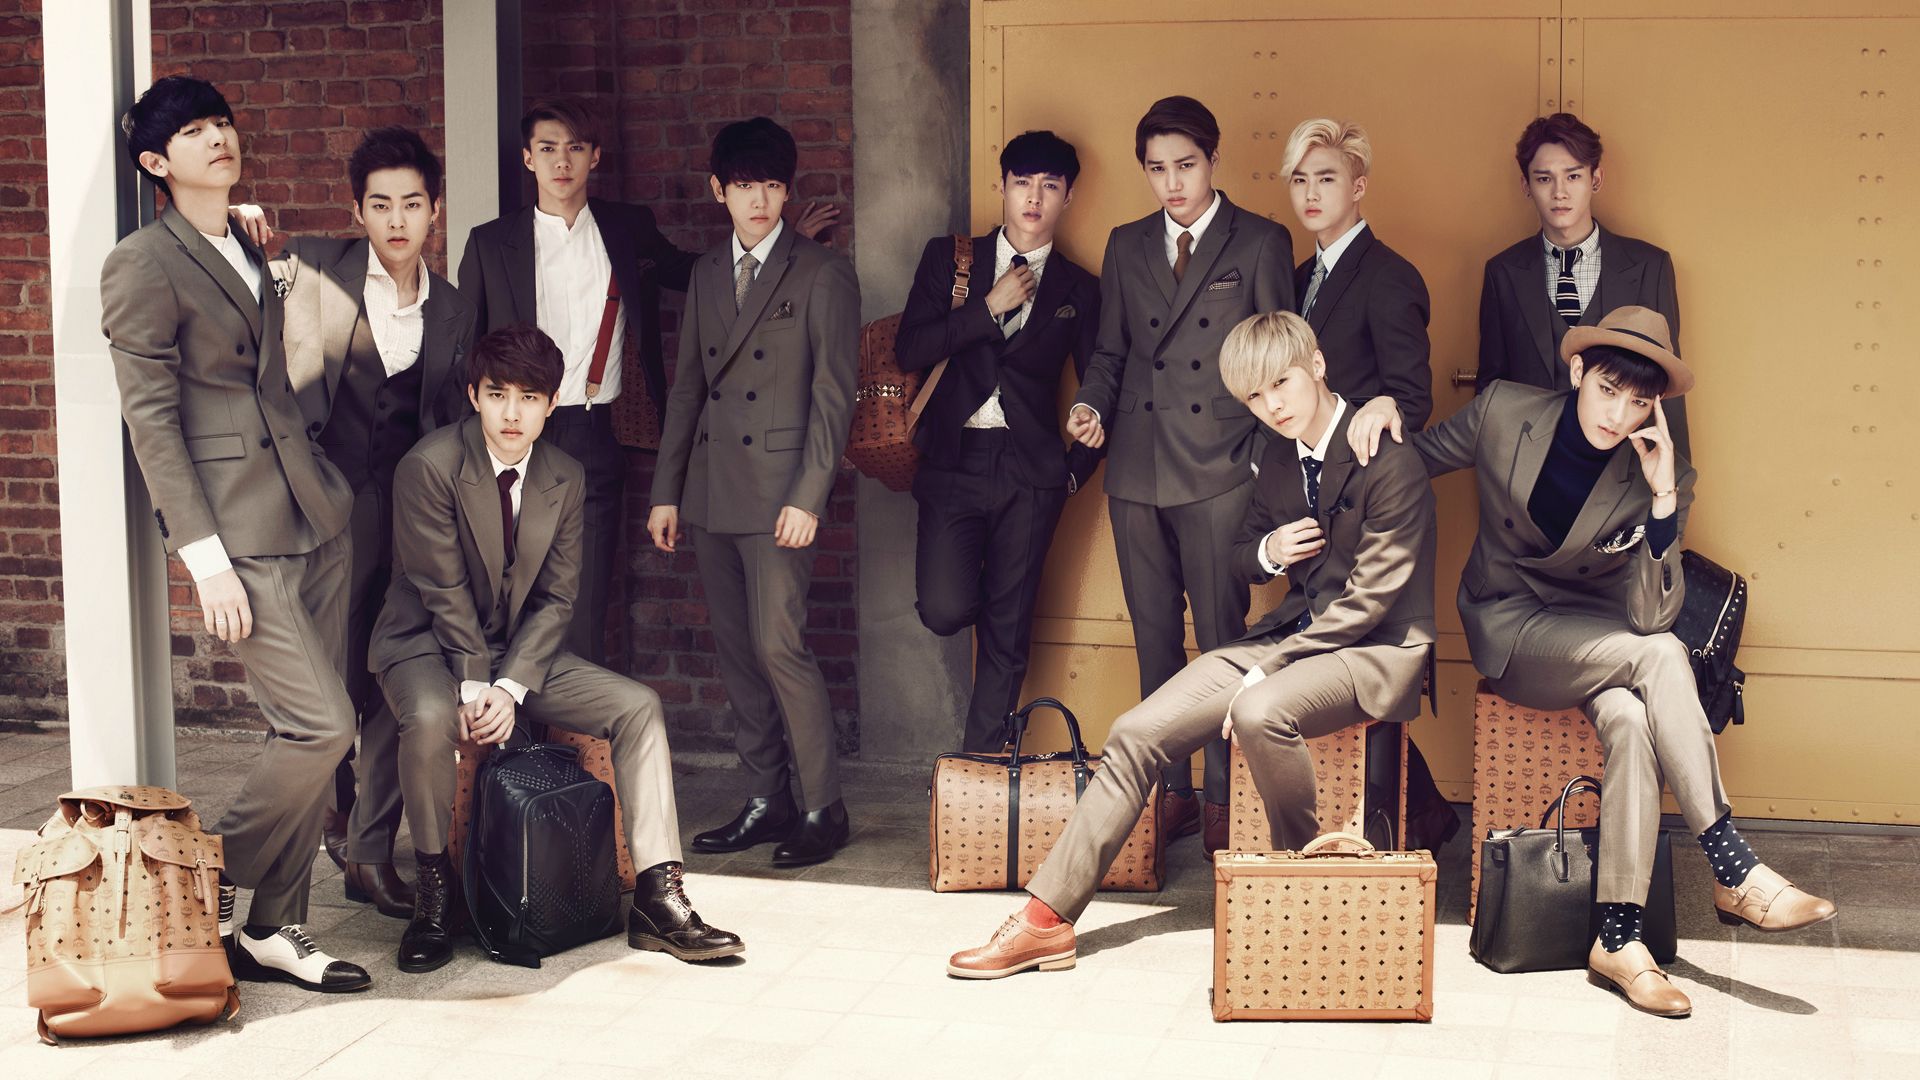 exo wallpaper hd,people,social group,sitting,event,white collar worker